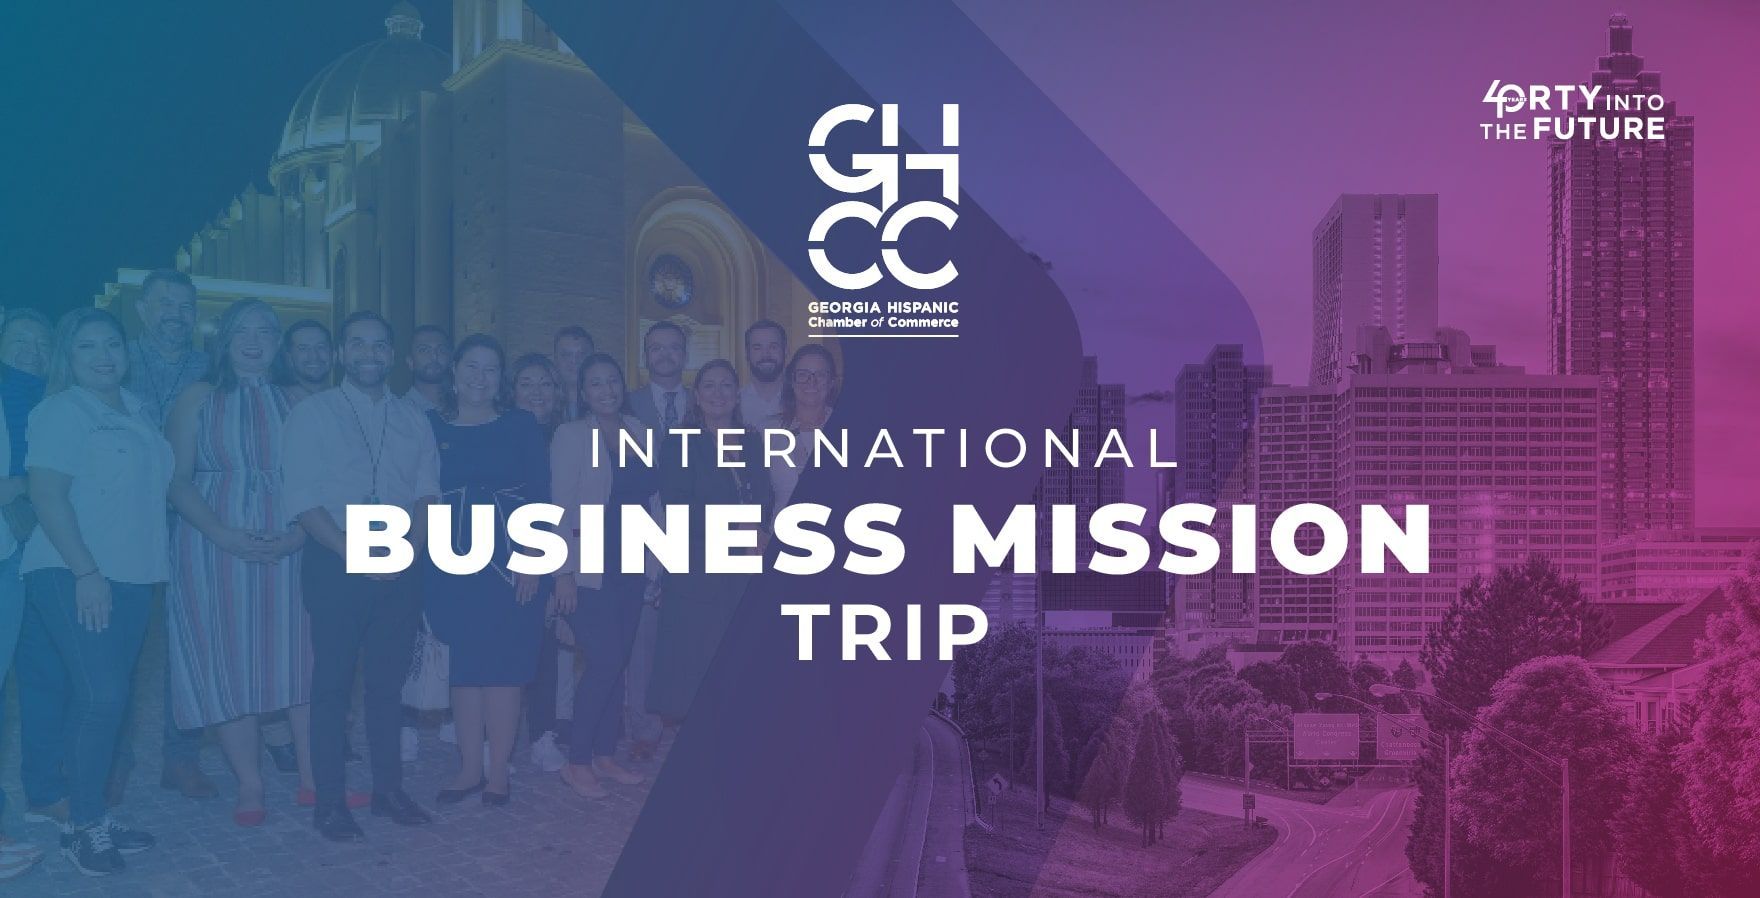 a poster for an international business mission trip